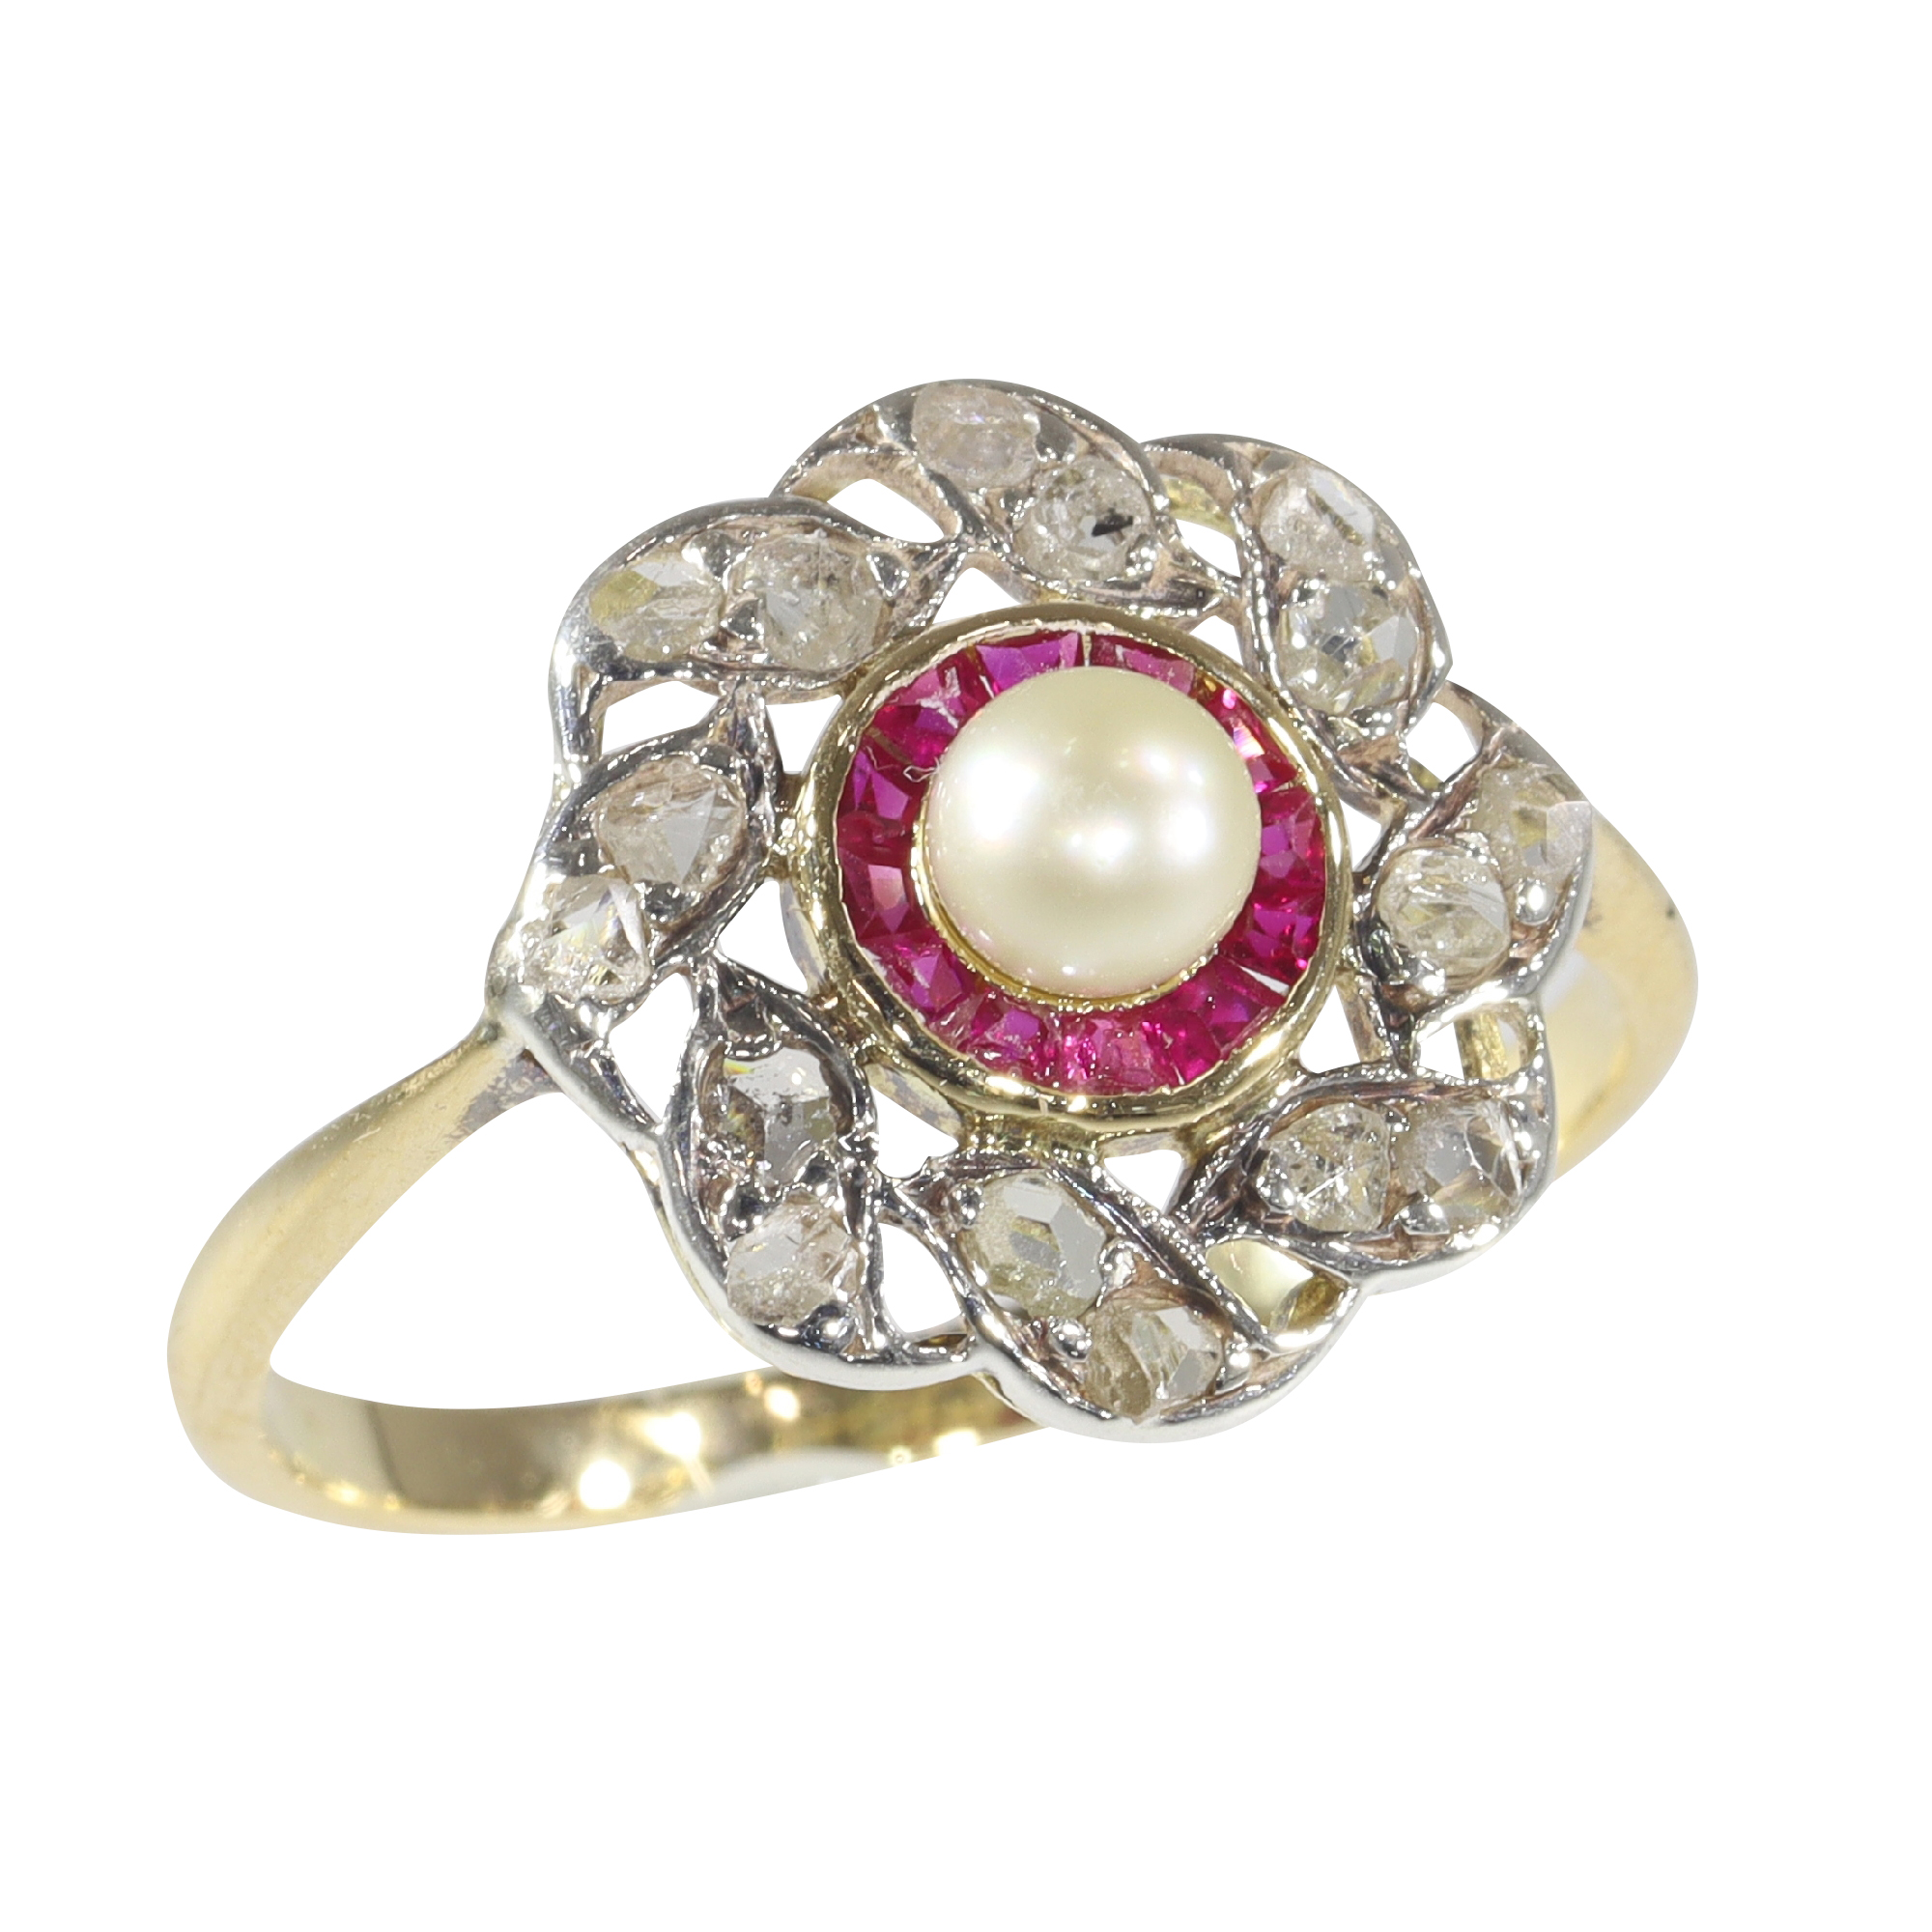 Vintage Art Deco diamond ruby and pearl ring